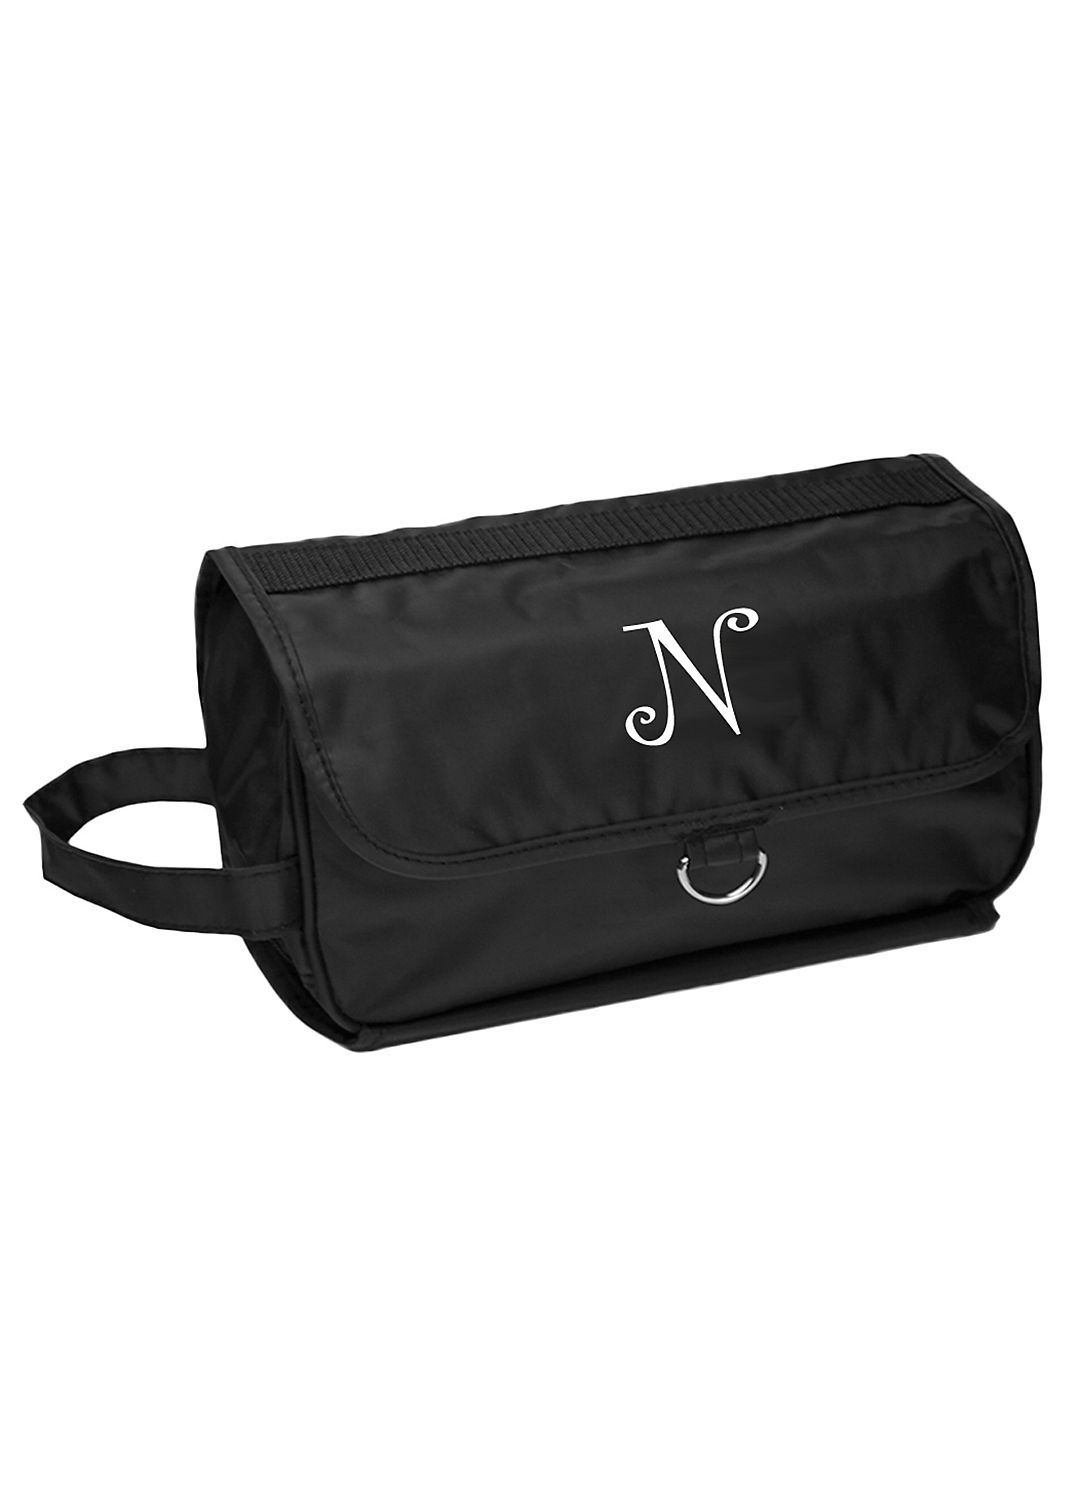 Personalized Jet-Setter Hanging Toiletry Bag Image 1